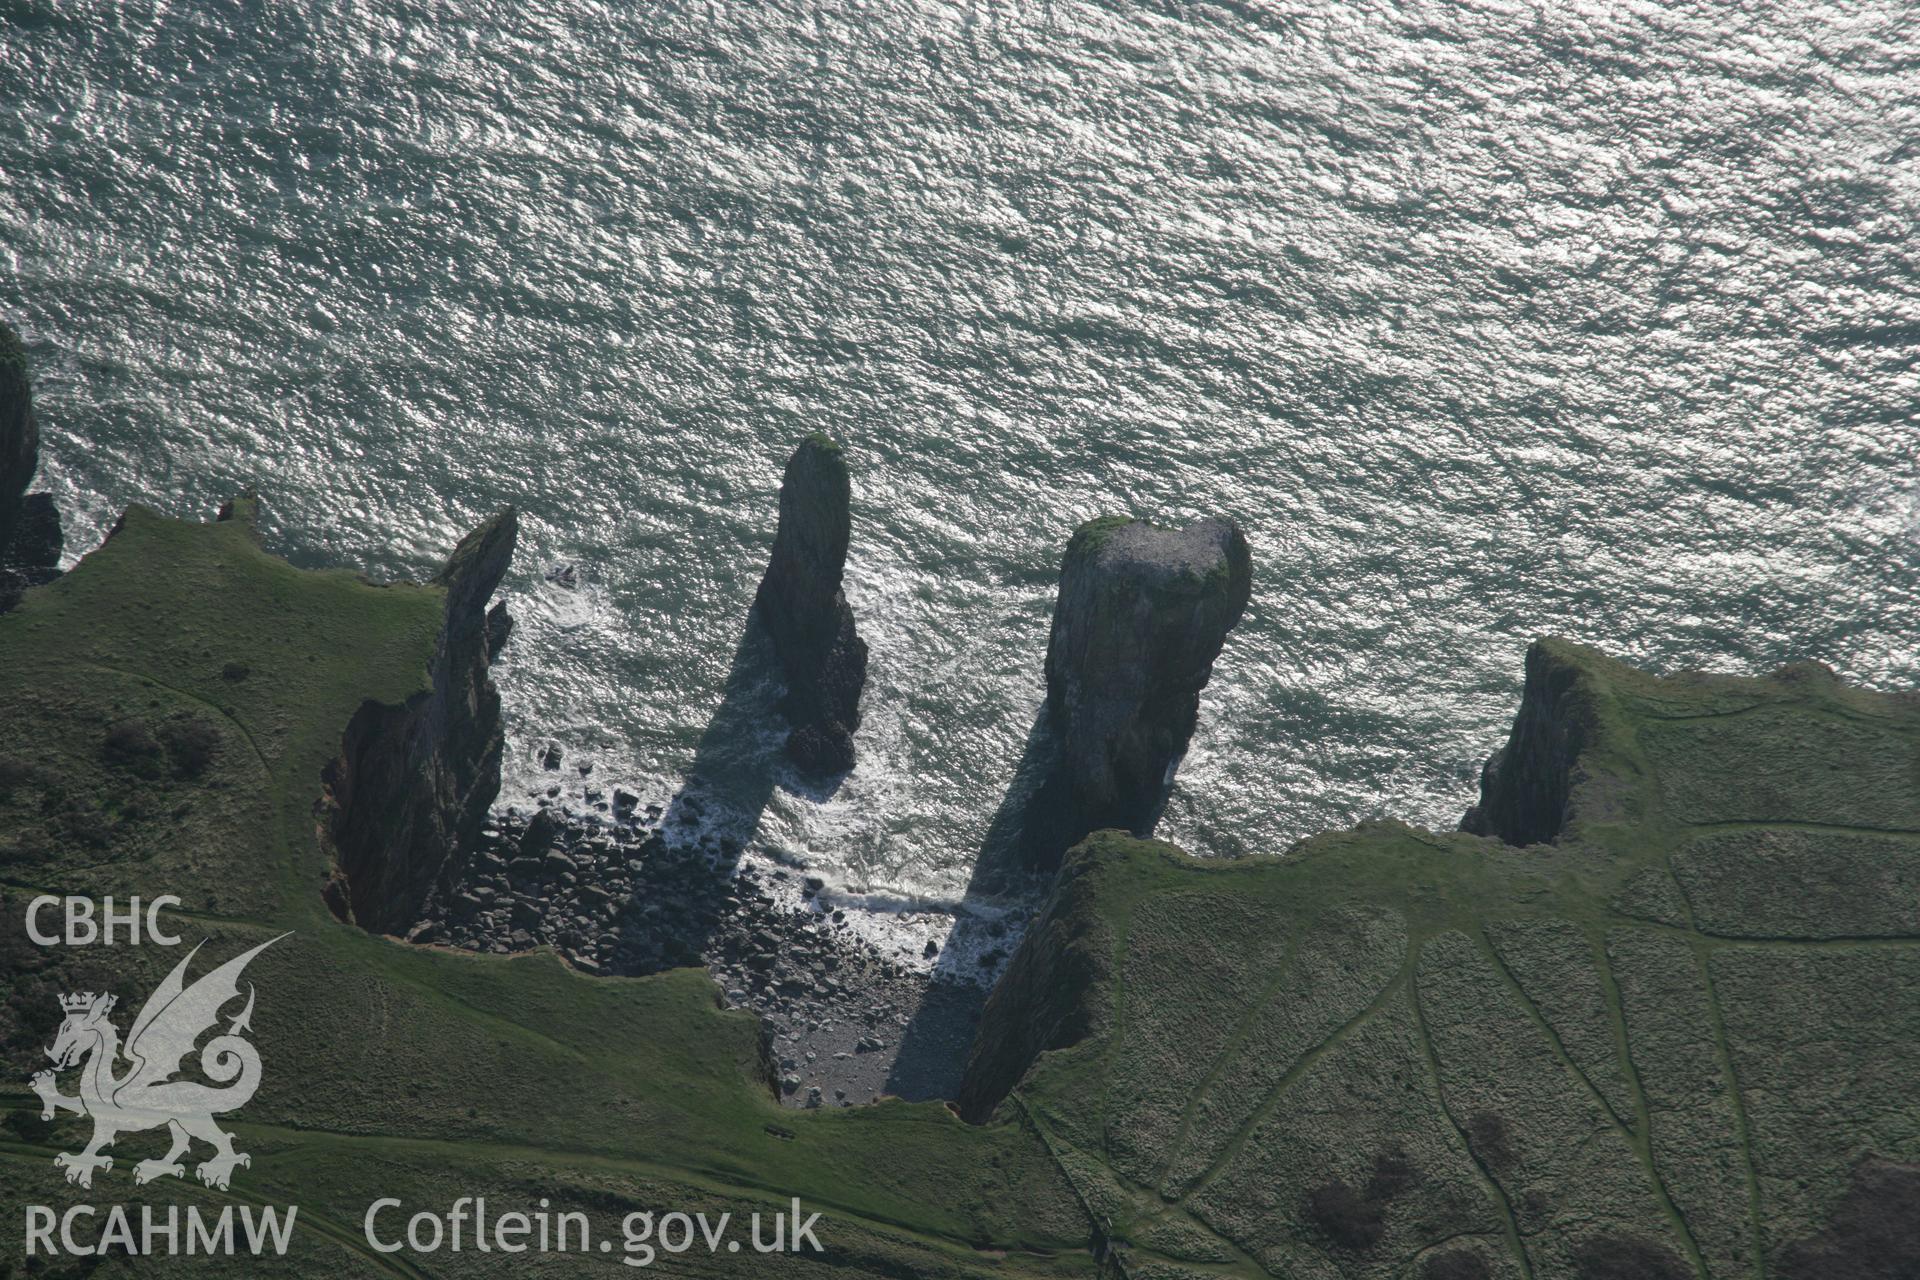 RCAHMW colour oblique aerial photograph of the Green Bridge (of Wales) and Elegug Stacks from the north. Taken on 19 November 2005 by Toby Driver